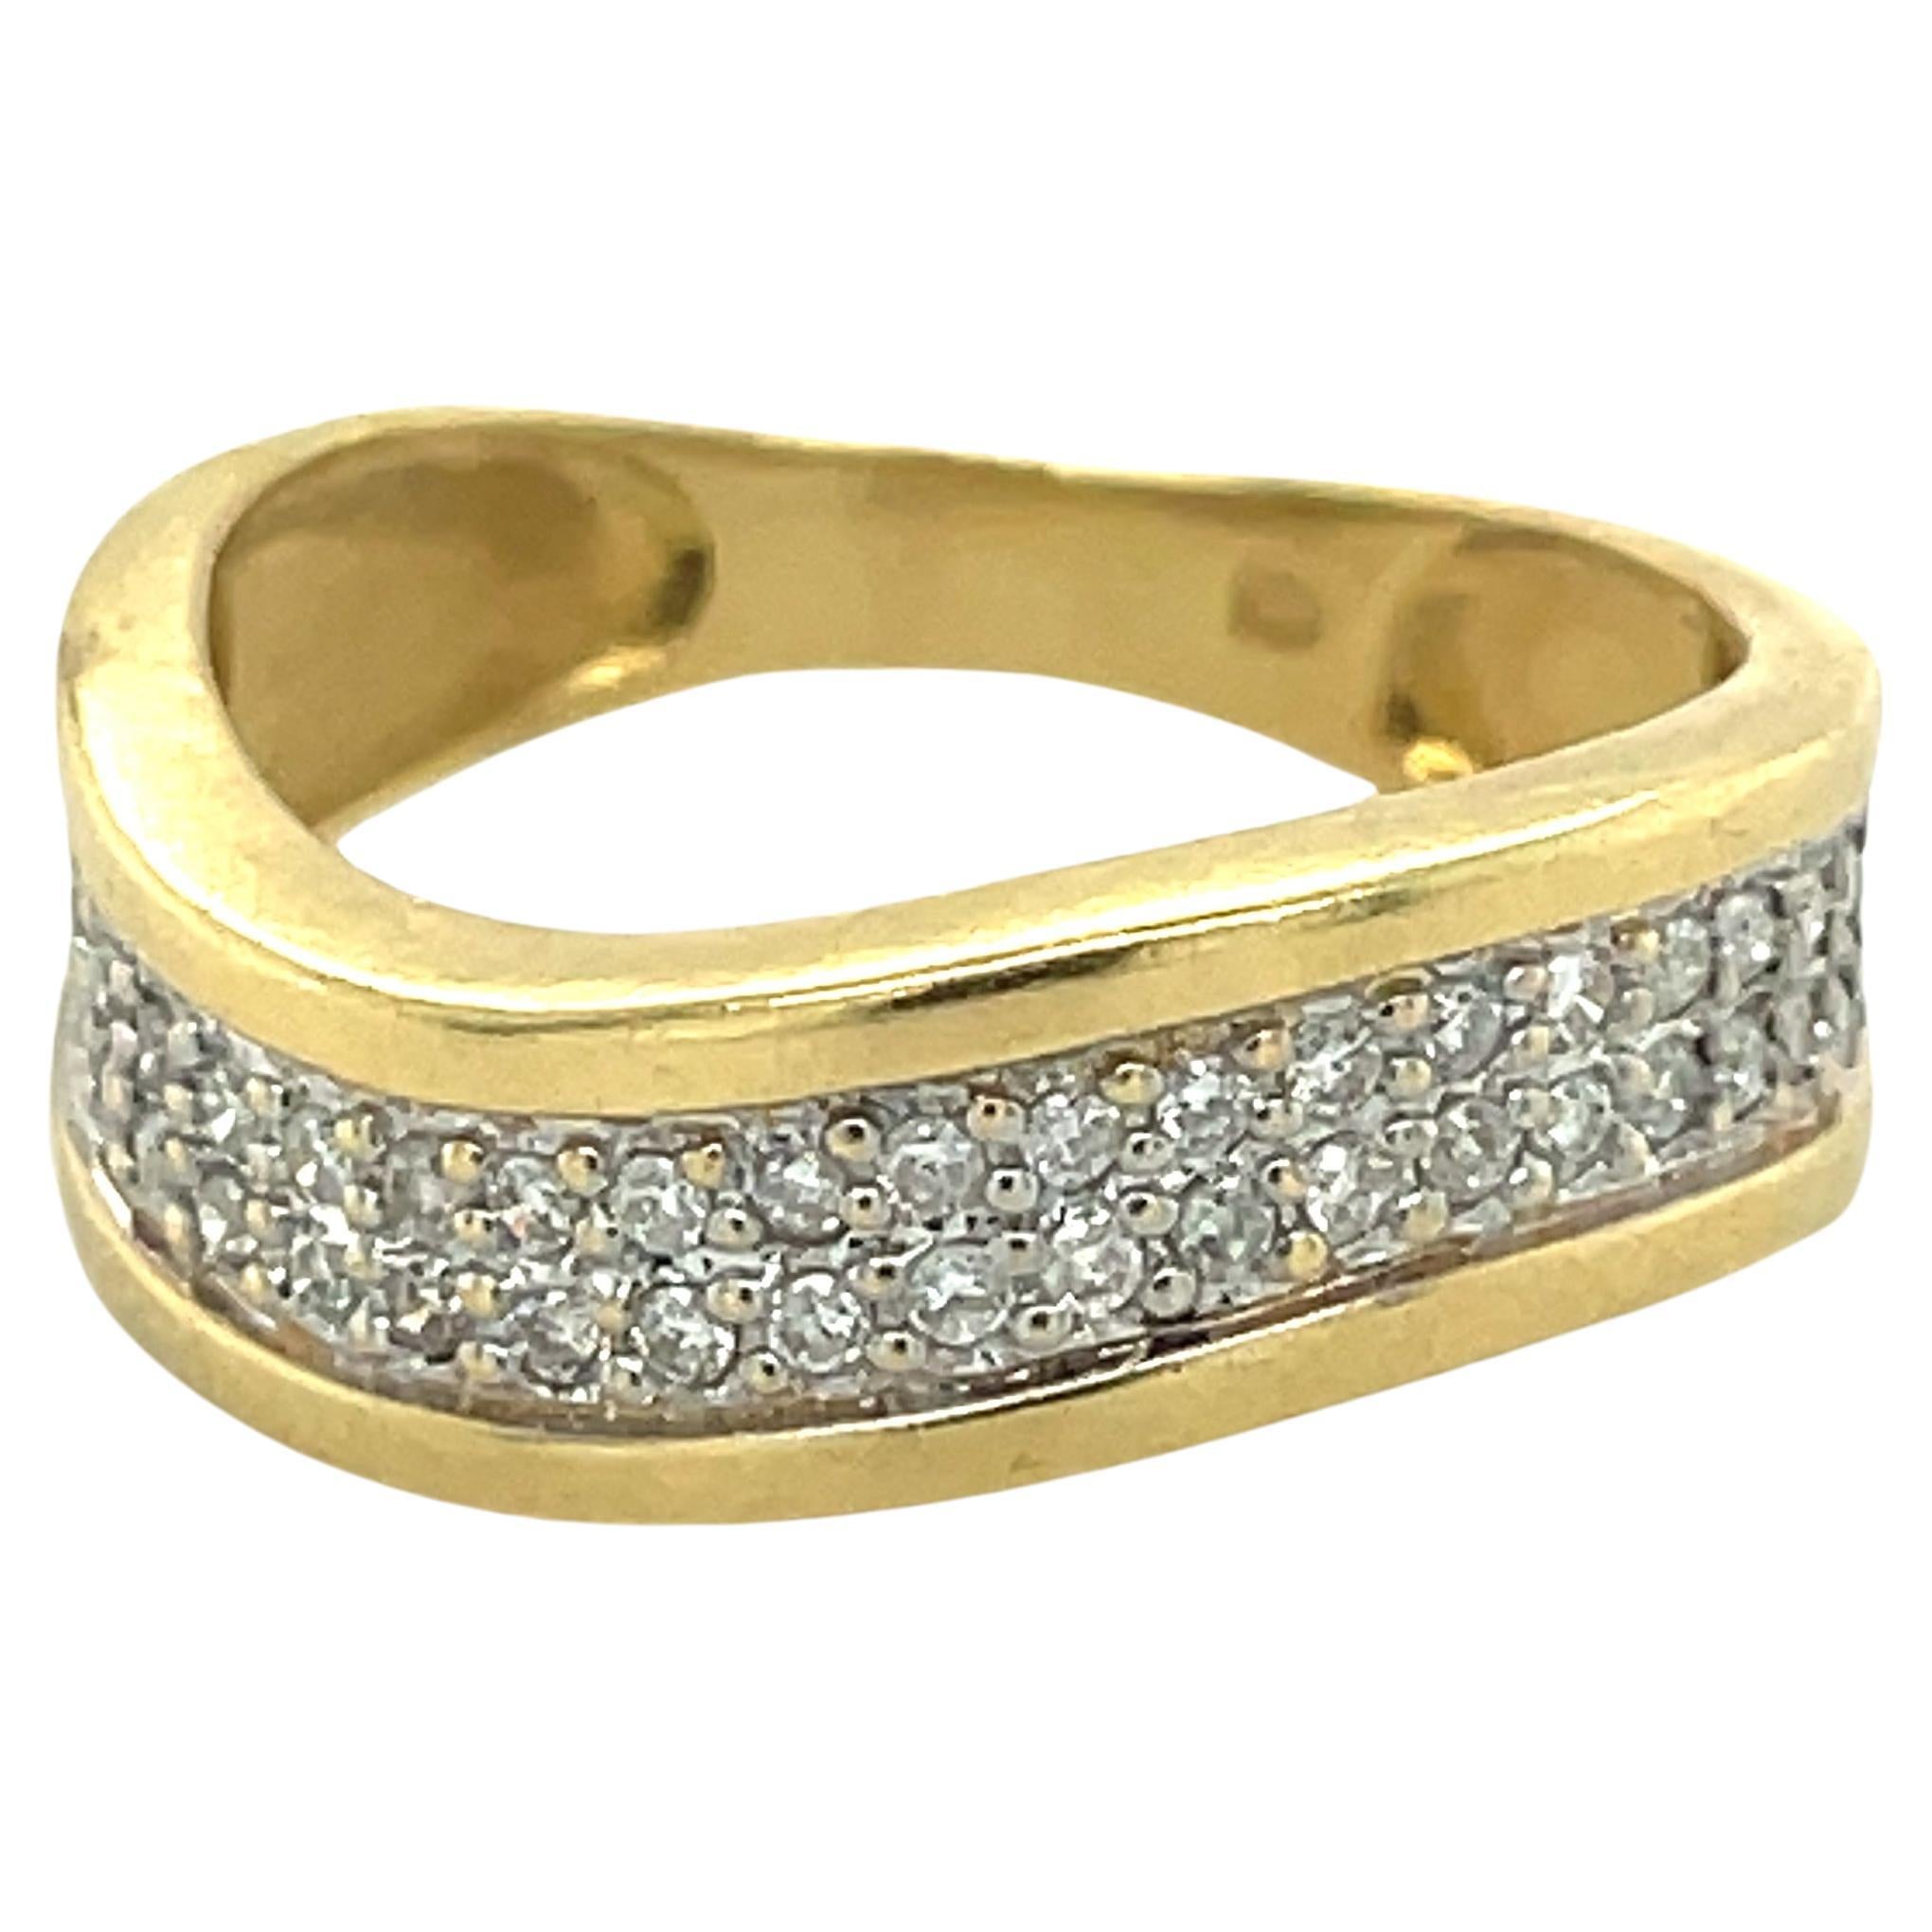 Vintage Gold Wave Band, 0.25CT Diamond, 18k Yellow Gold ring, weddding band ring For Sale